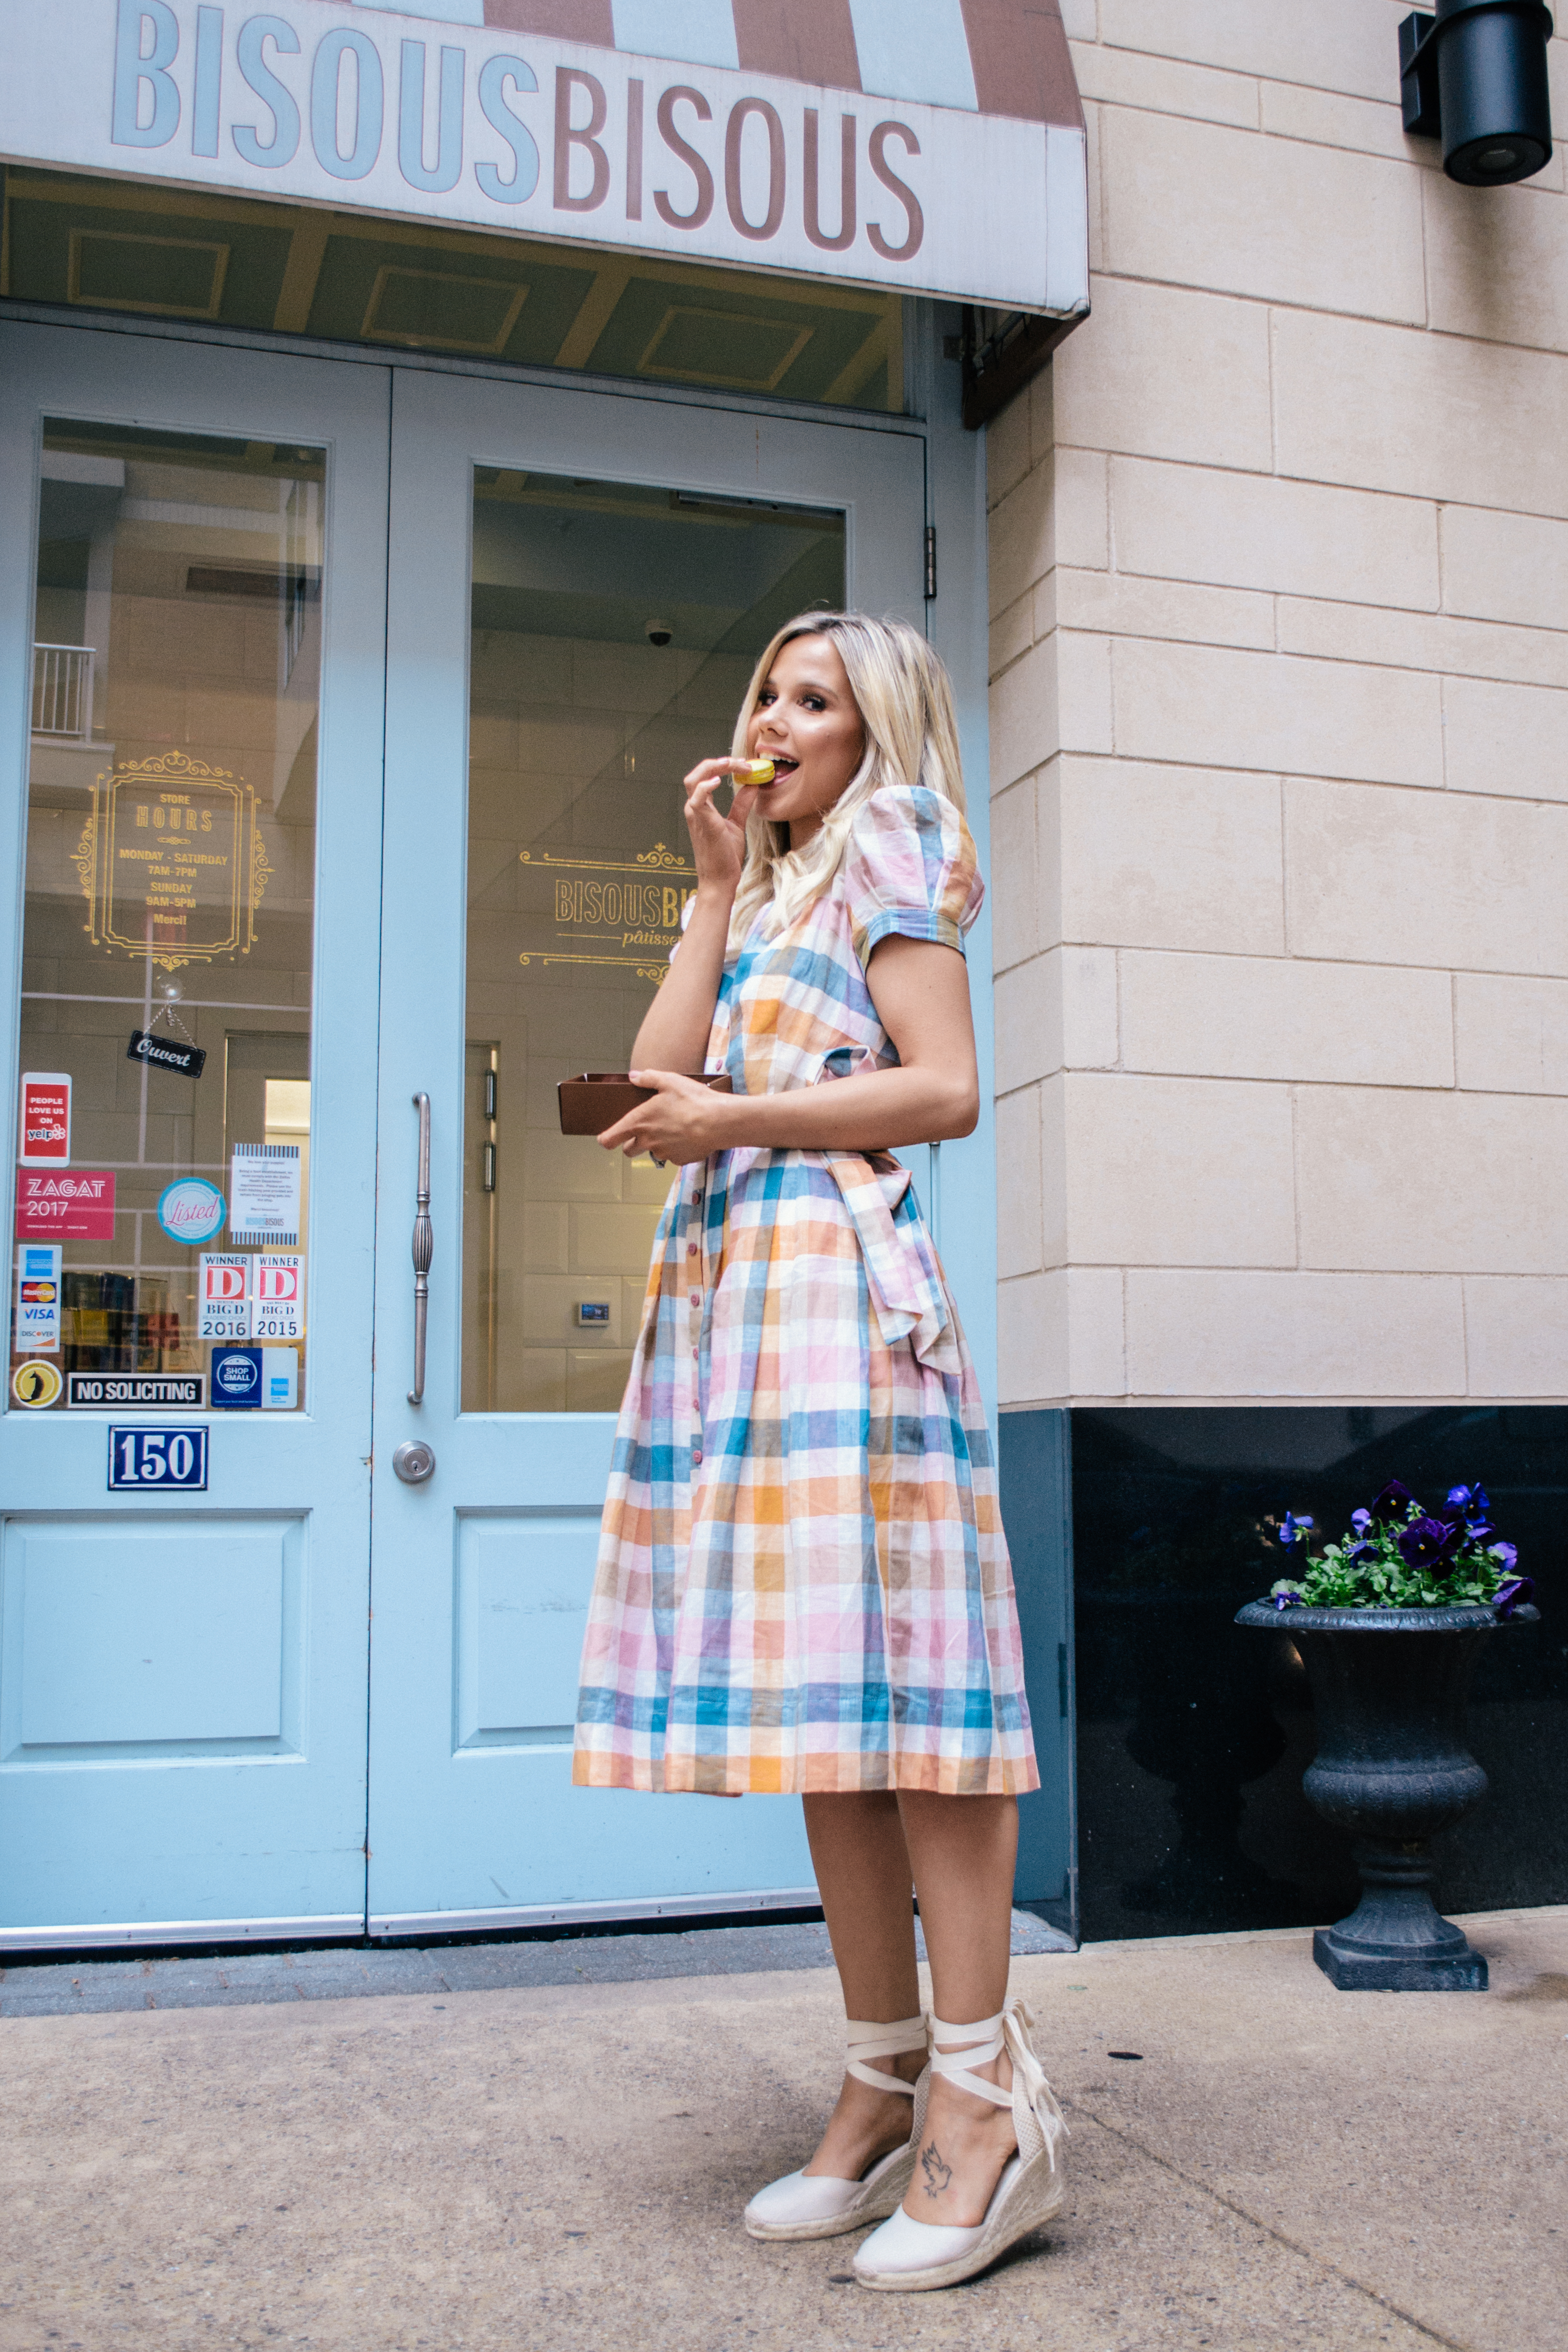 What to Wear to Spring Showers, baby shower outfit, bridal shower outfit, plaid dress, gmg, gal meets glam collection dress, poppy dress, colorful dress #gmg #galmeetsglam #plaiddress